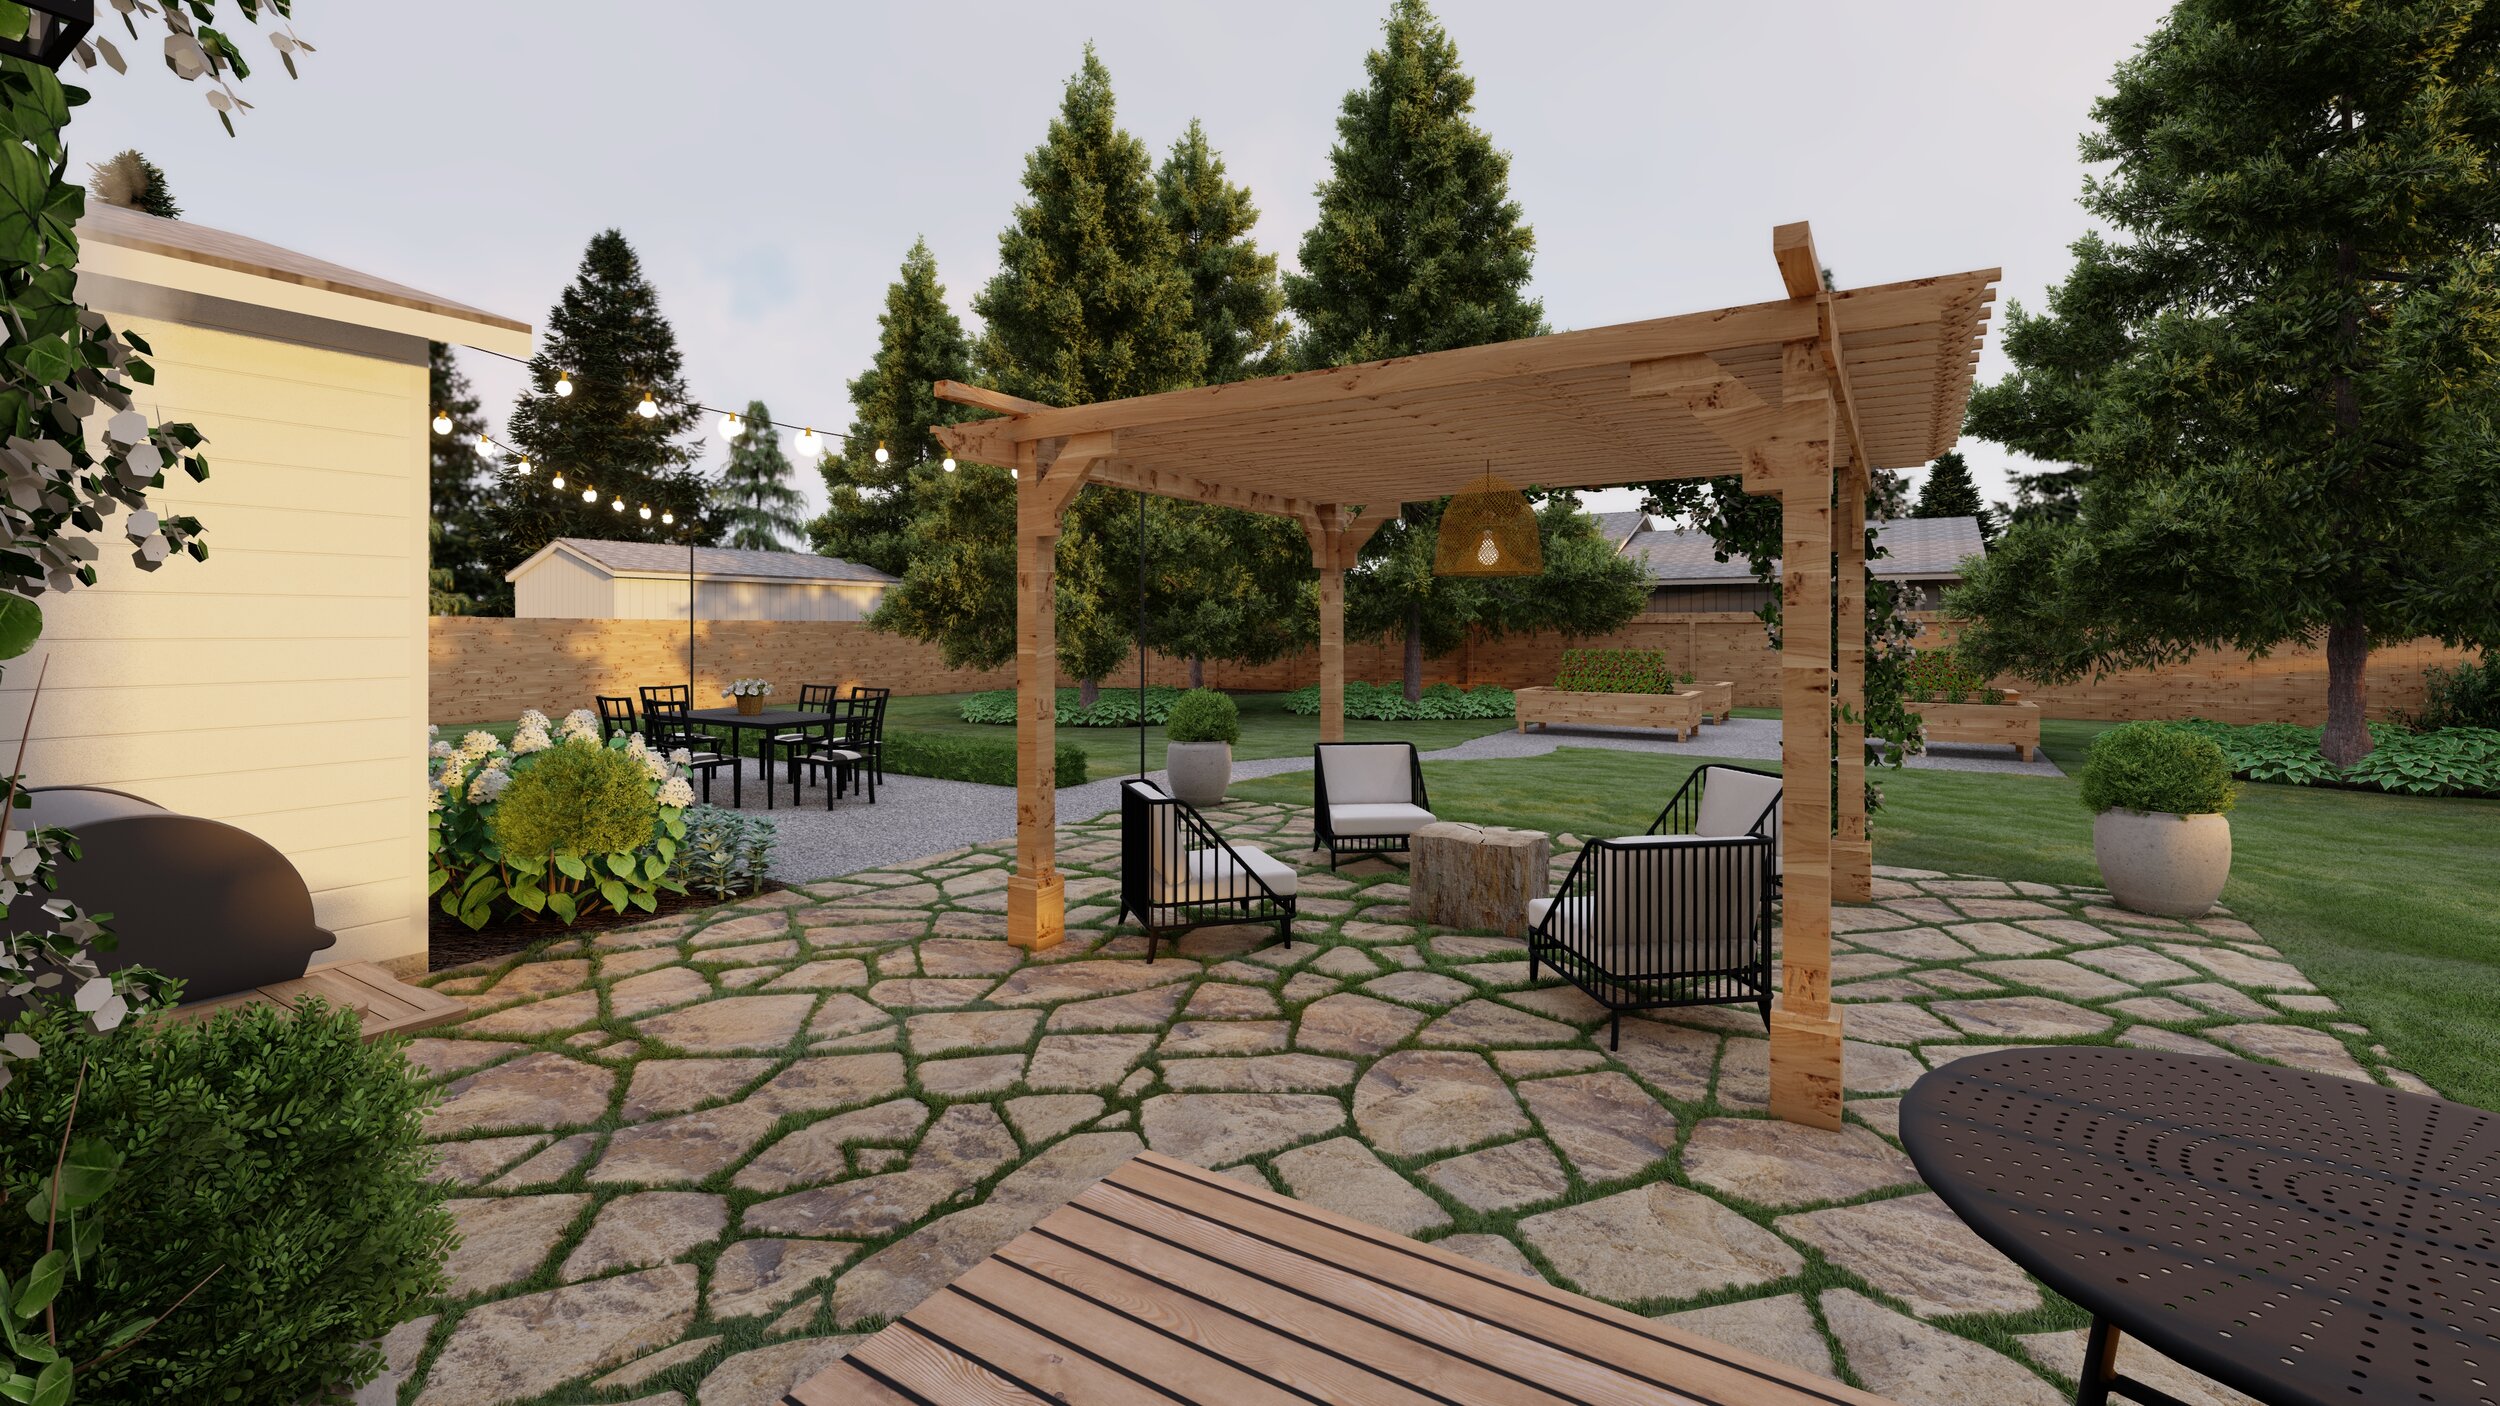 Backyard view of outdoor lounge area under wooden pergola near bbq grill and raised planter beds